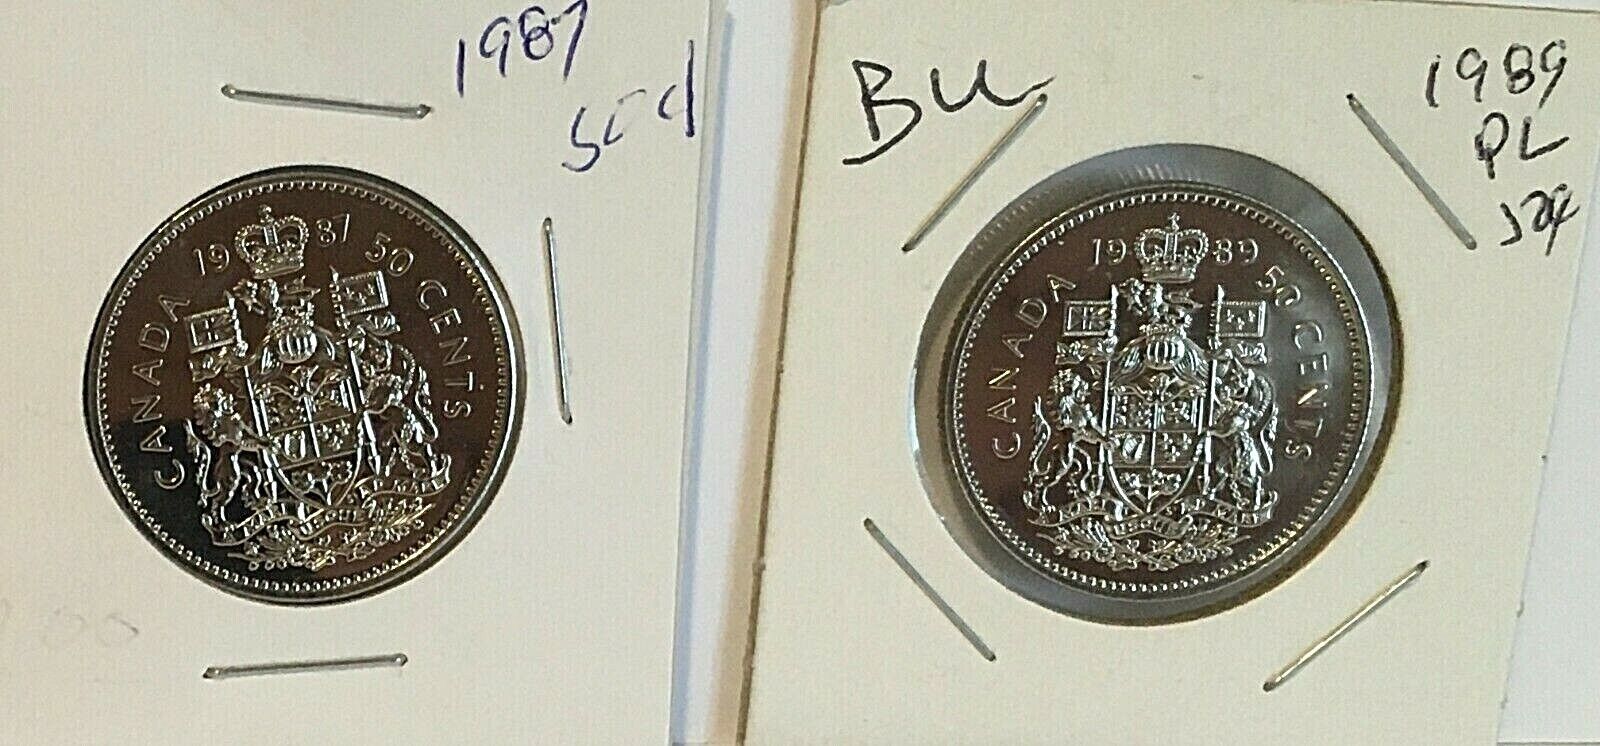 CANADA 1987 & 89   50 CENT NICKEL COIN FROM A HUGE COLLECTION 'KEEP FOLLOWING US Без бренда